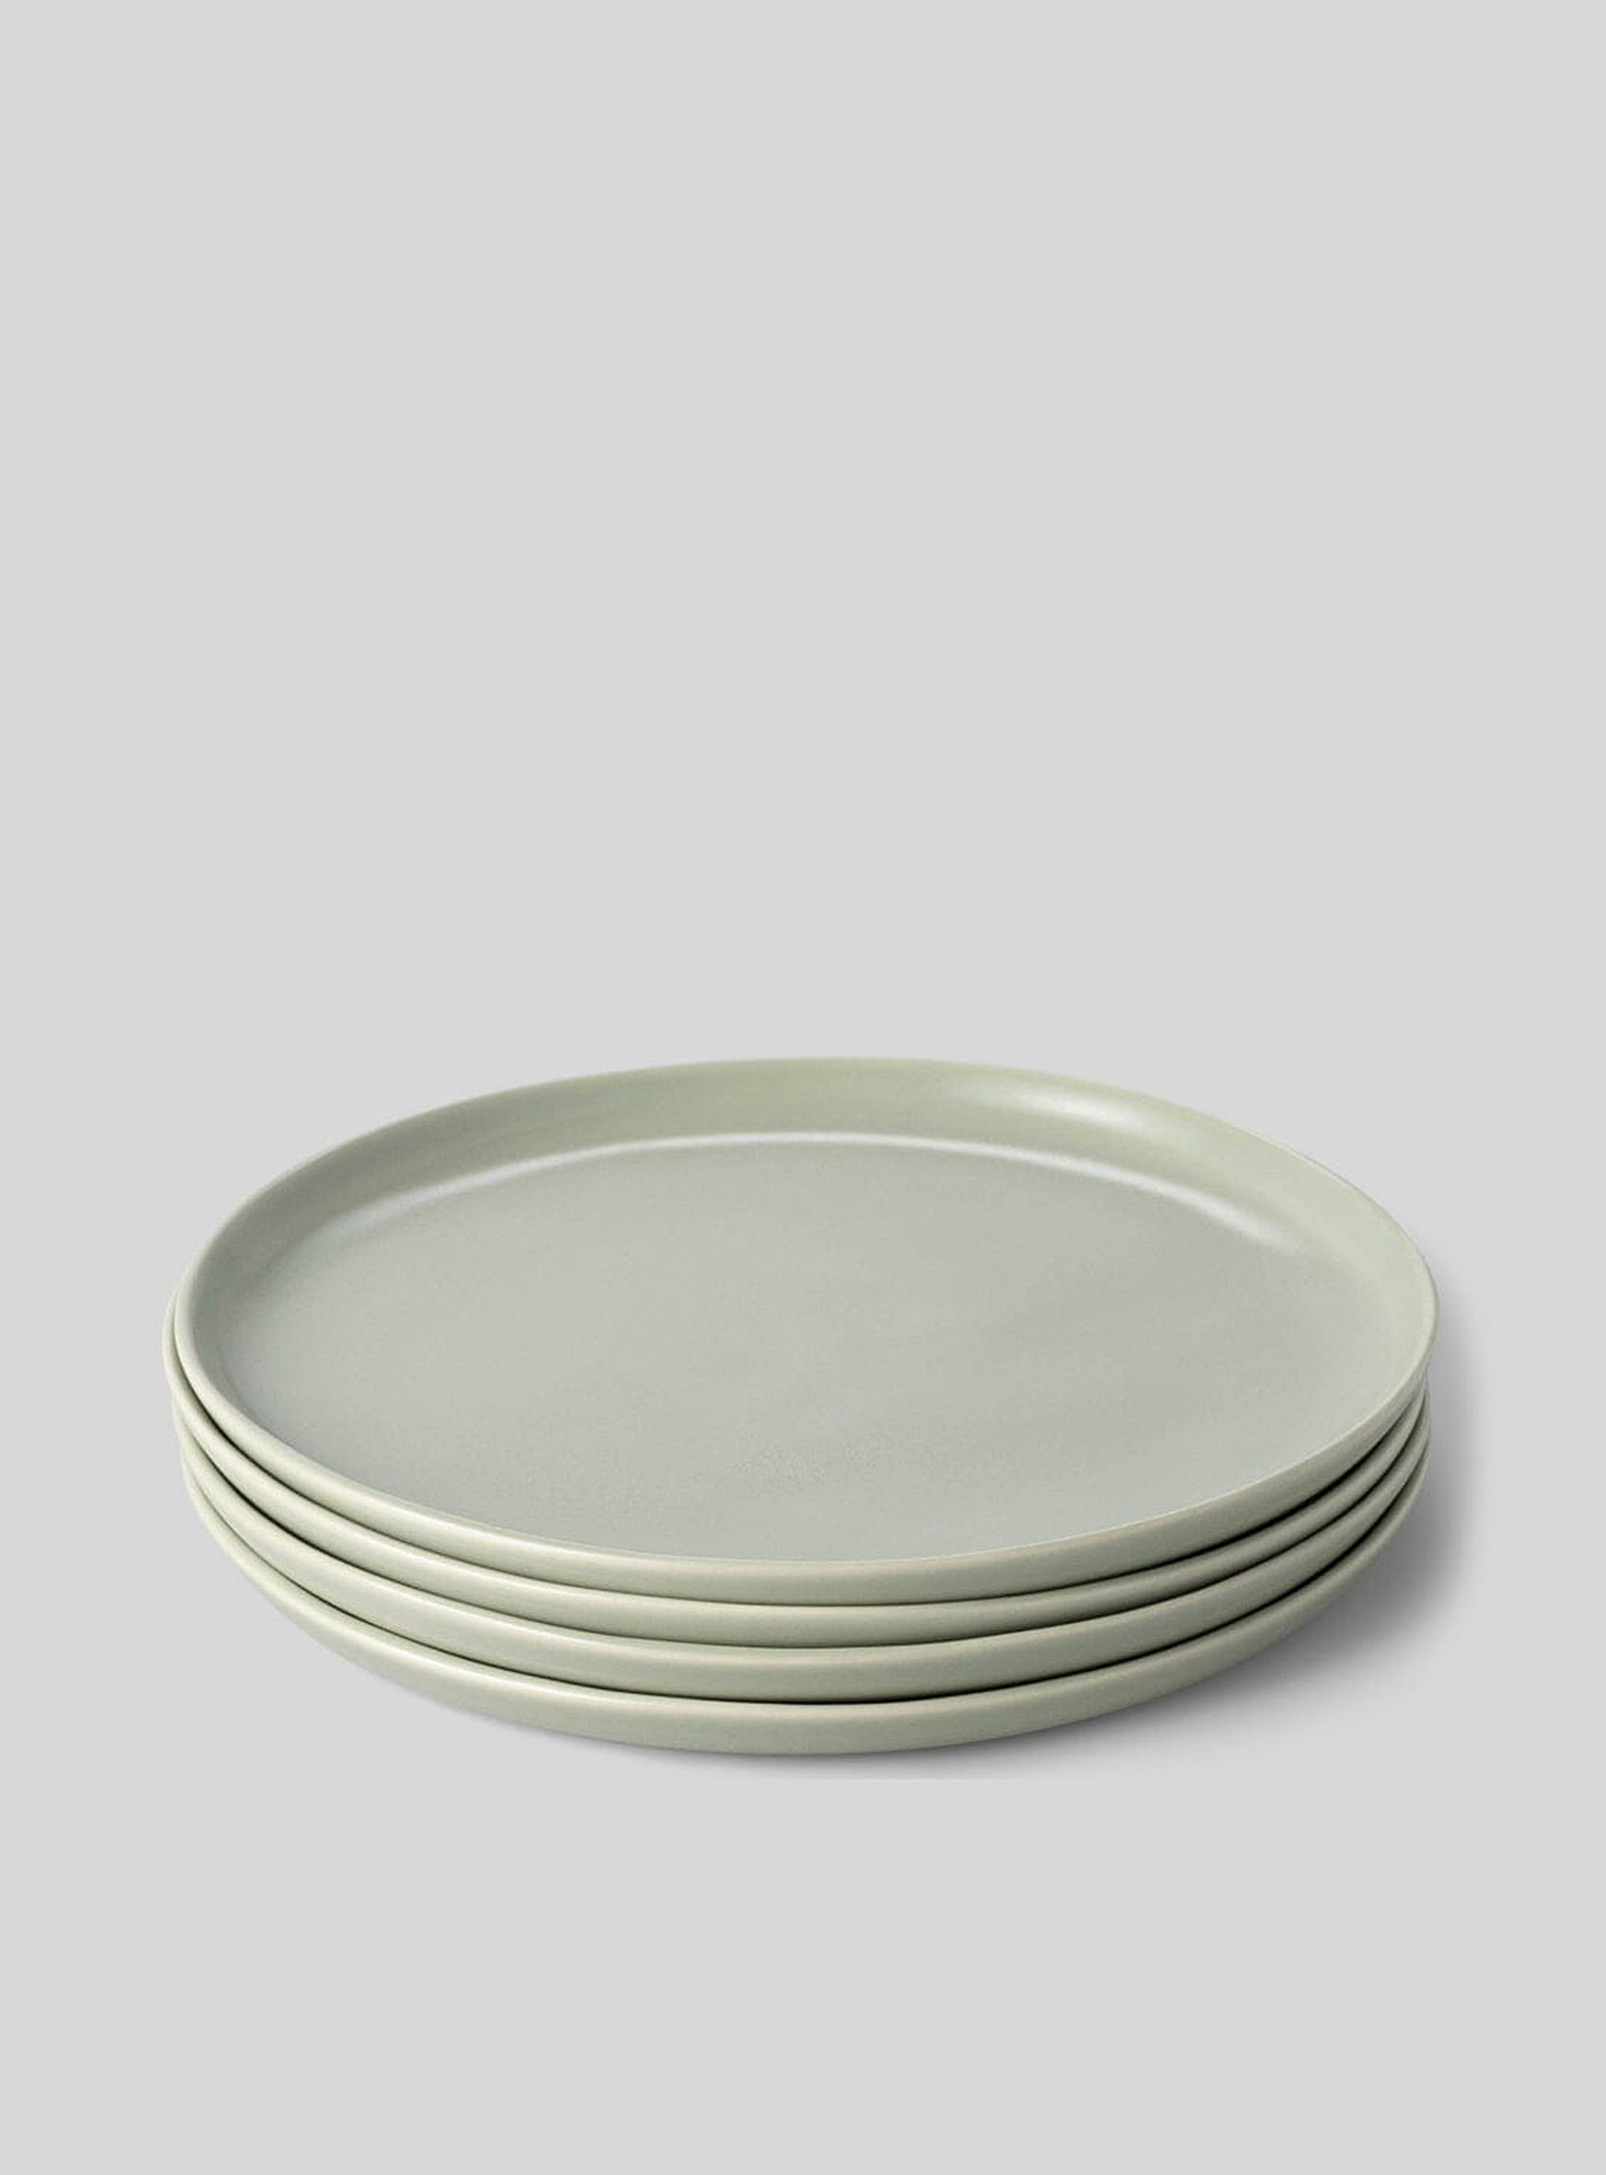 Fable Minimalist Stoneware Salad Plates Set Of 4 In Lime Green